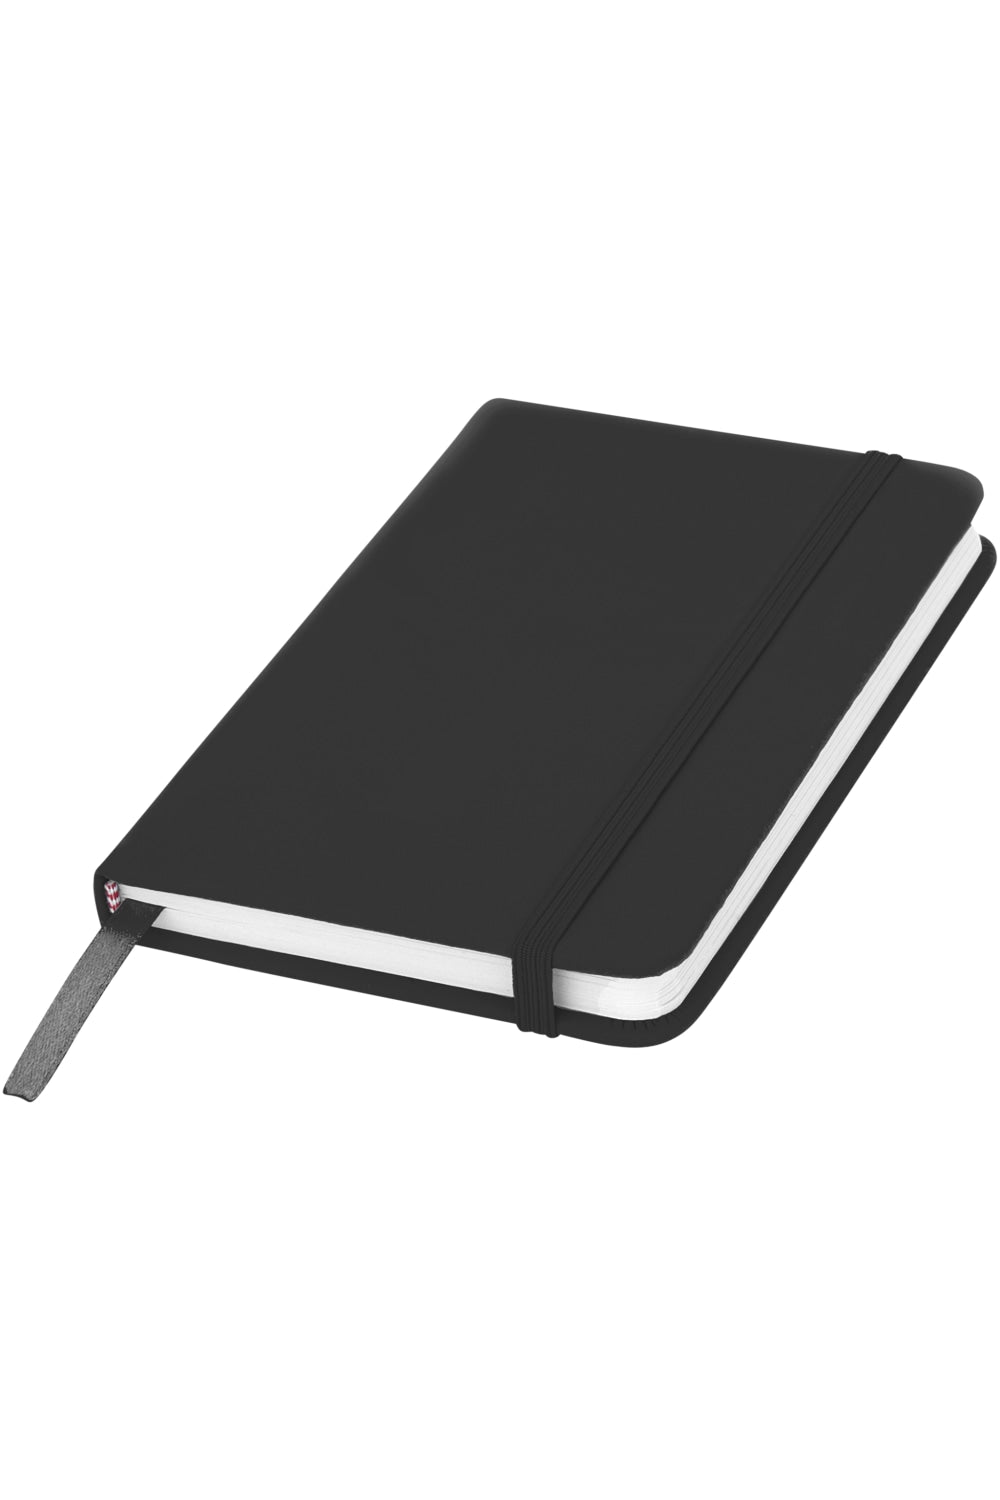 Bullet Spectrum A6 Notebook (Solid Black) (5.5 x 3.5 x 0.5 inches)